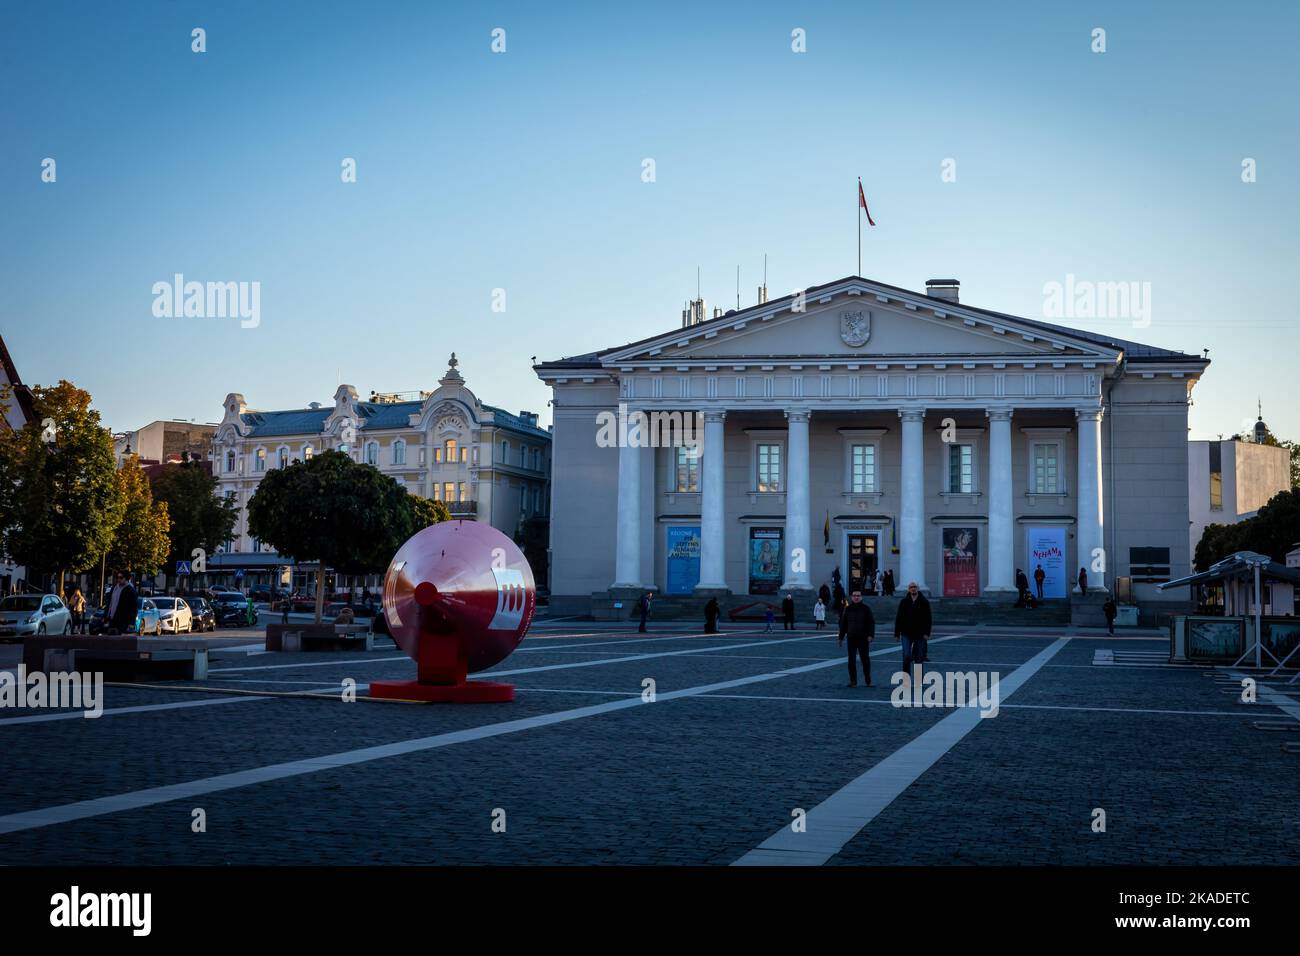 Vilnius, Lithuania - September 26, 2022: Town hall building and square in the Old Town of Vilnius. Stock Photo